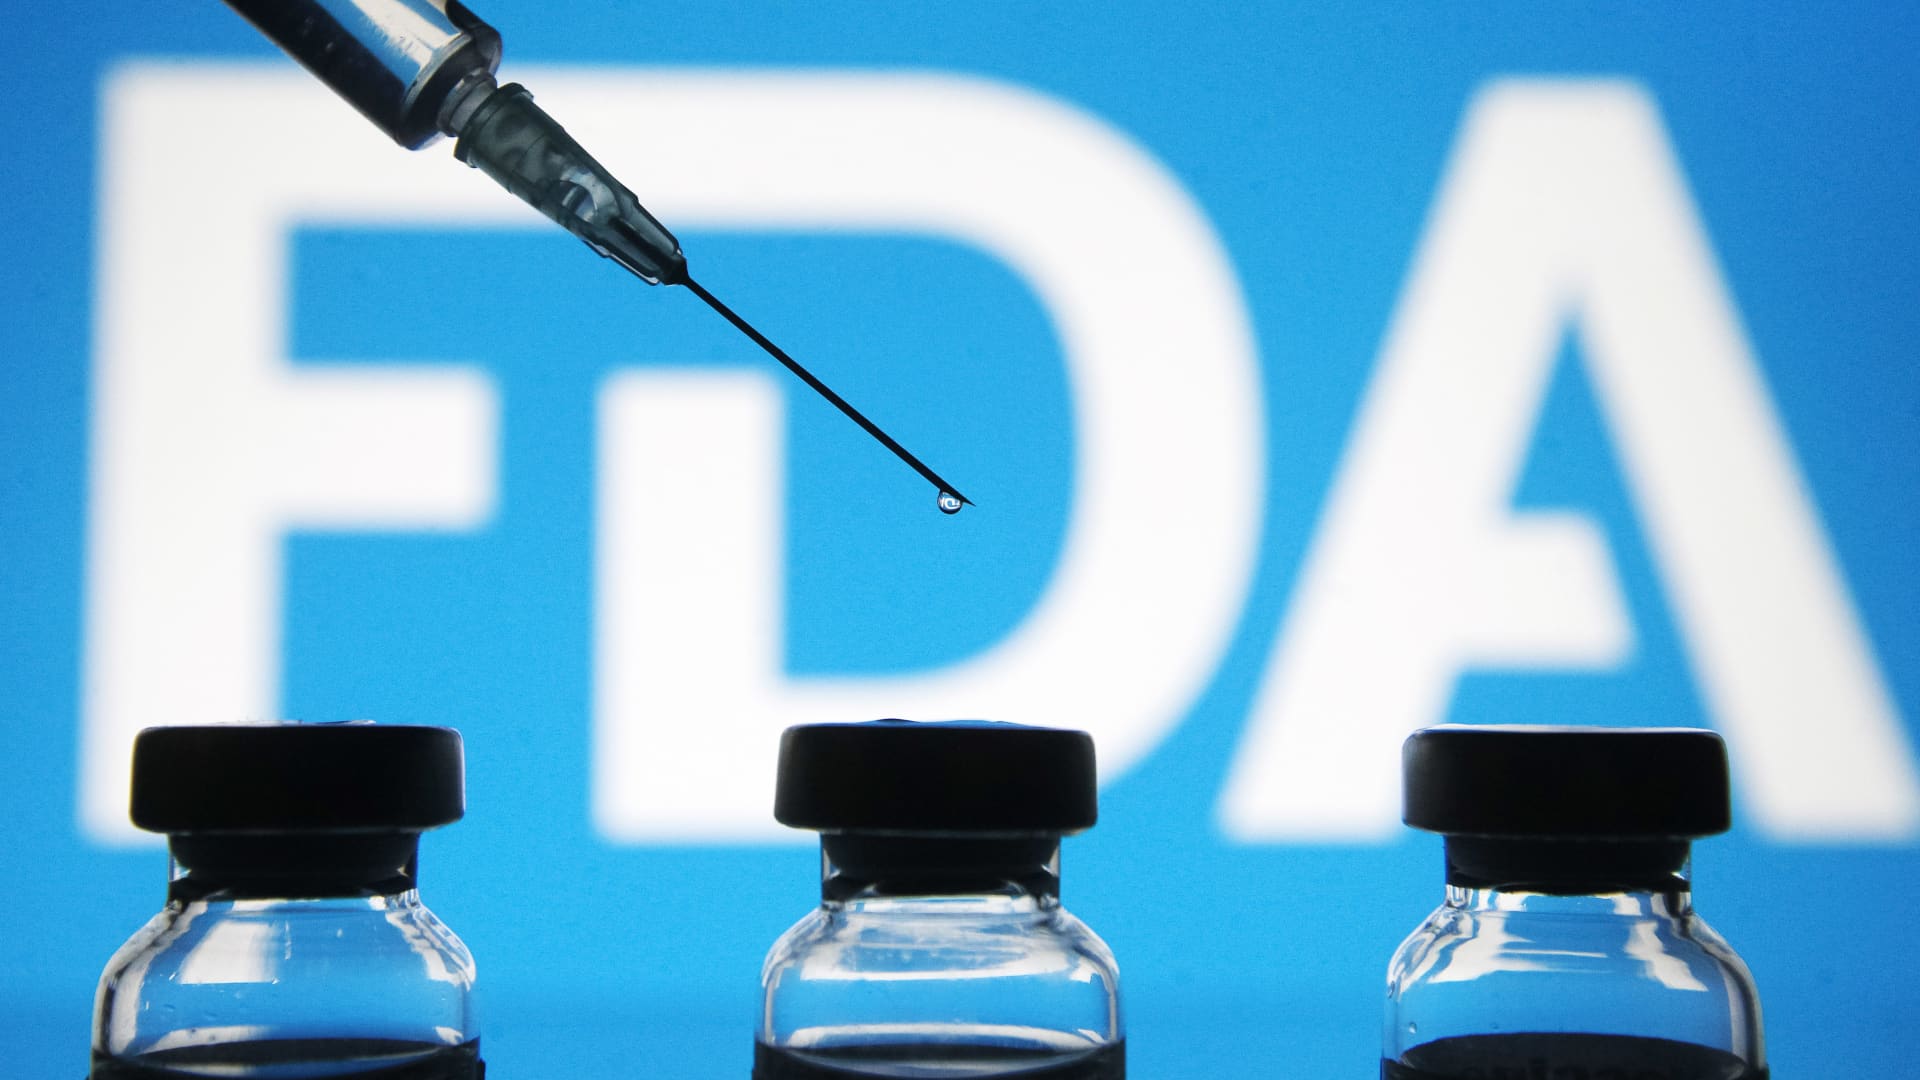 Vials and a medical syringe seen displayed in front of the Food and Drug Administration (FDA) of the United States logo. FDA finds the COVID-19 vaccine.